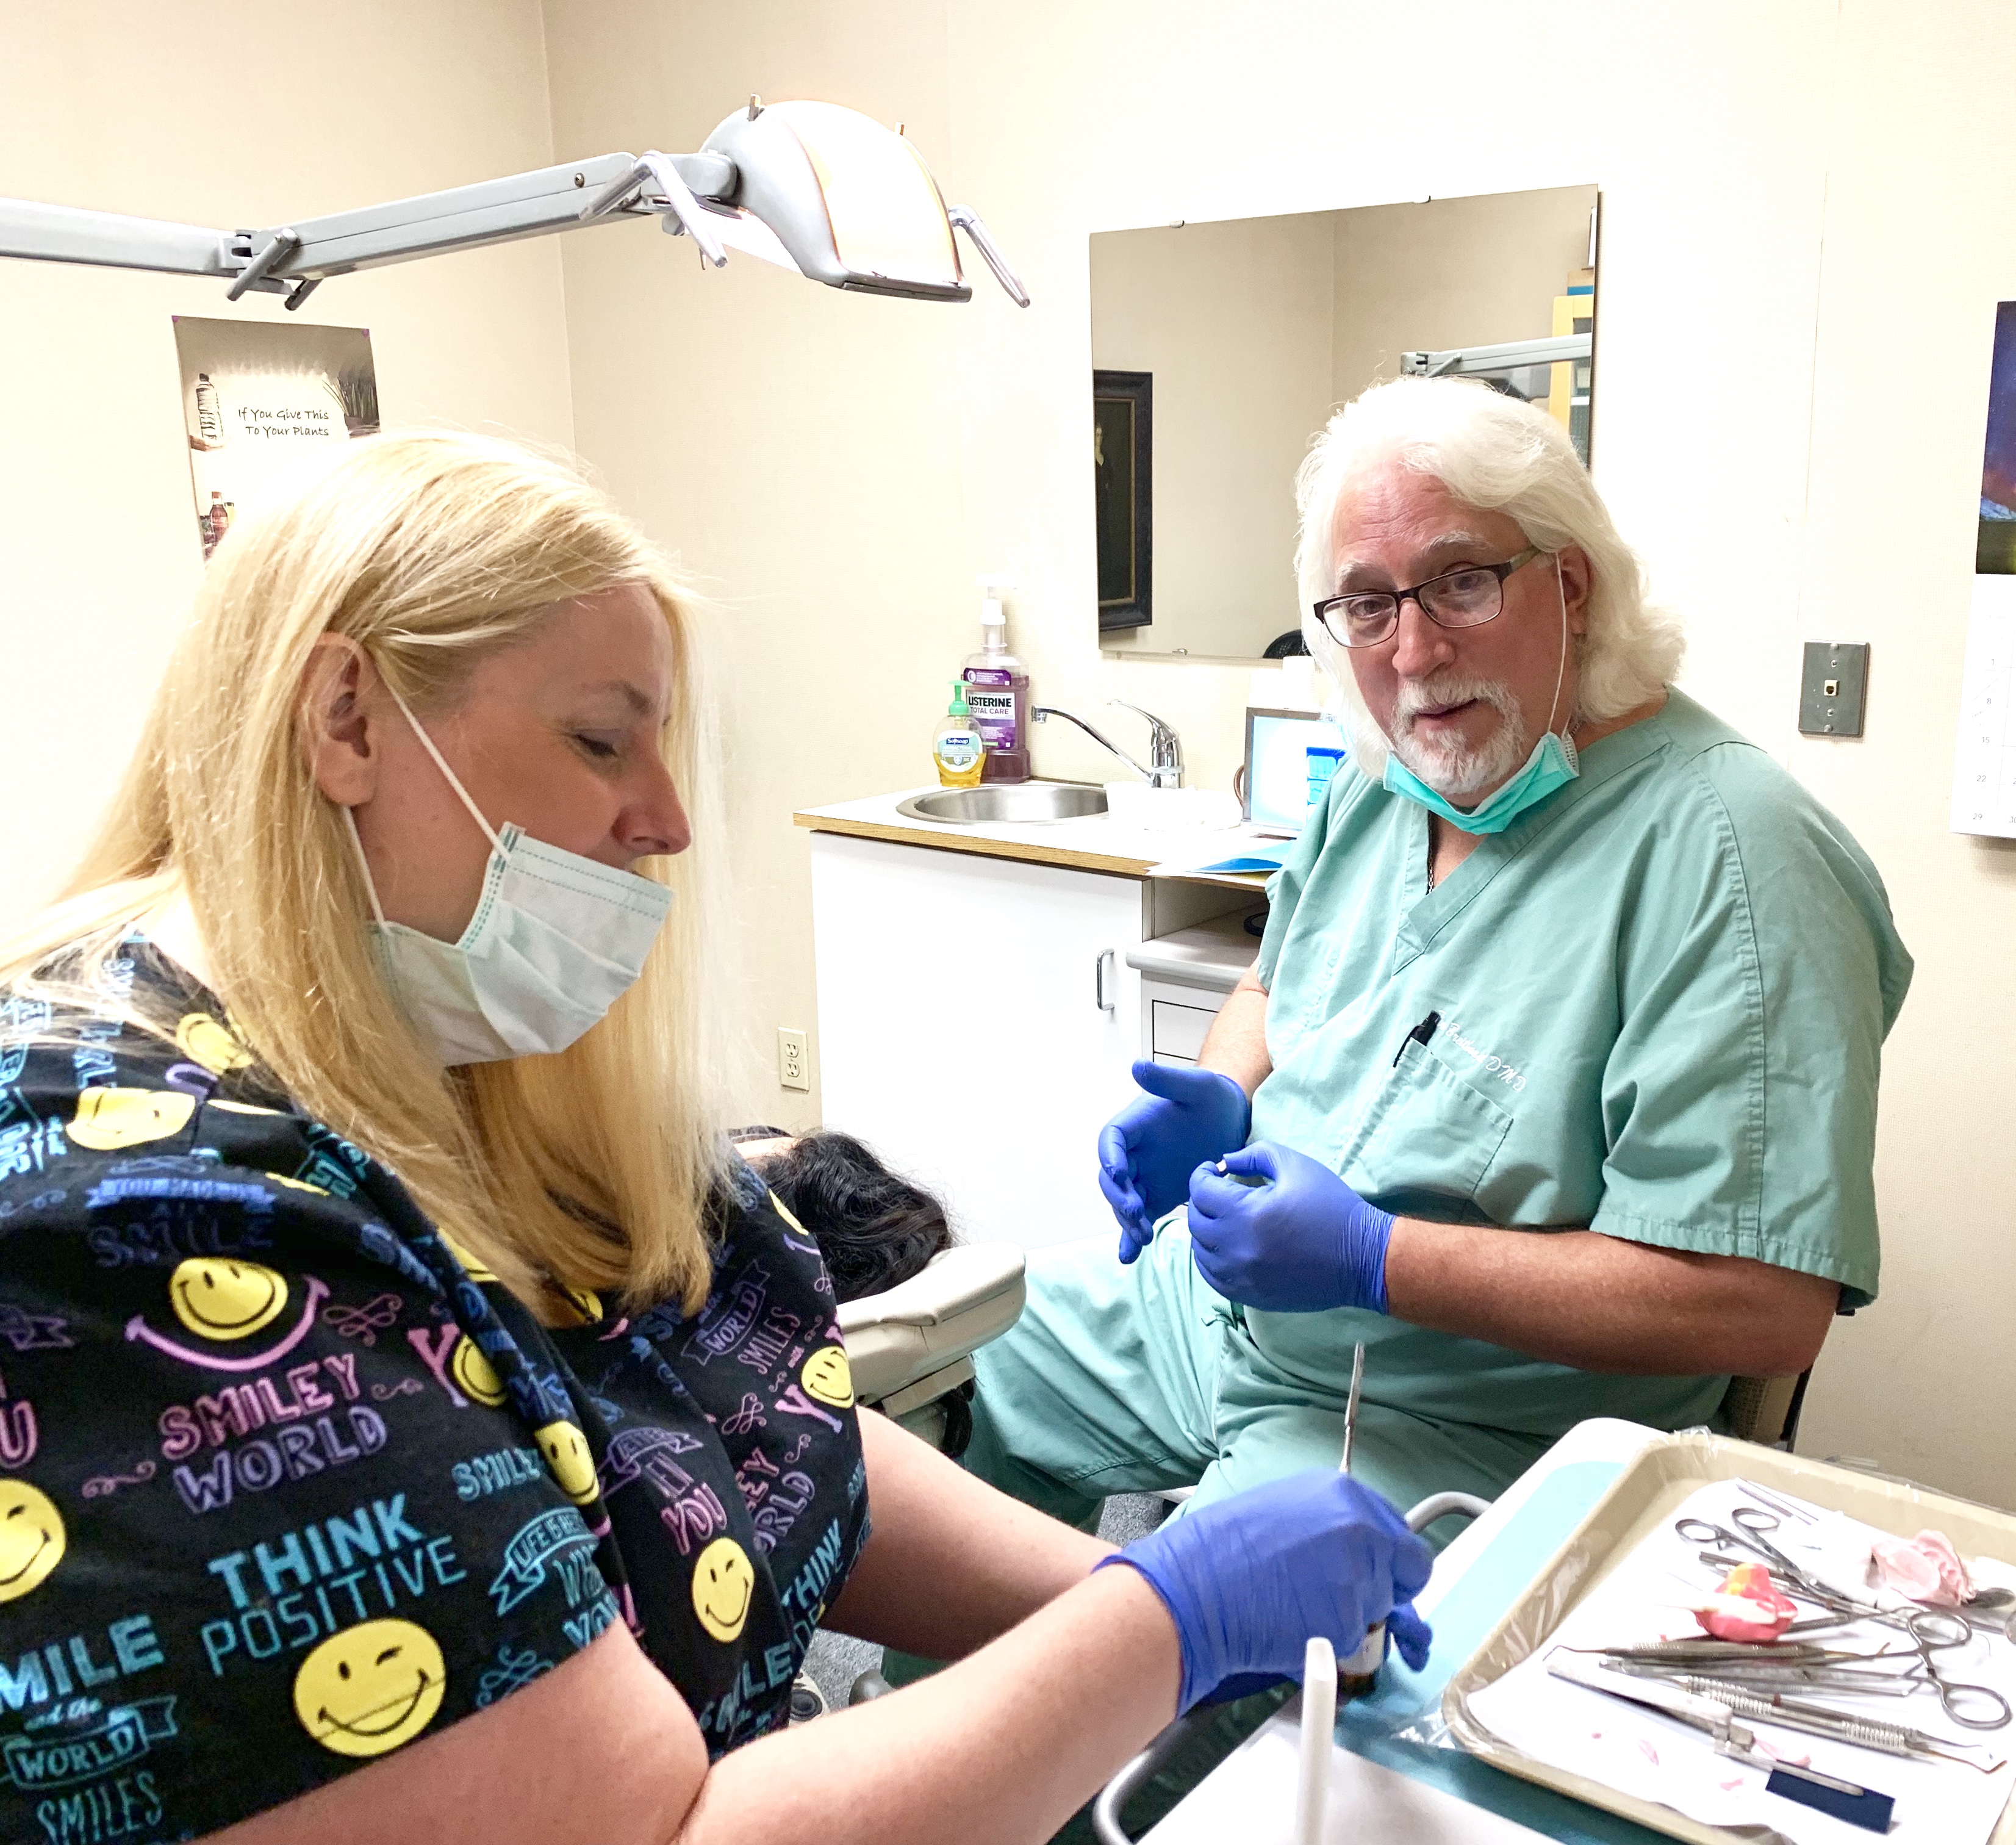 Dr Tom and Renee taking good care of our valued patients at Audubon Family Dentistry.